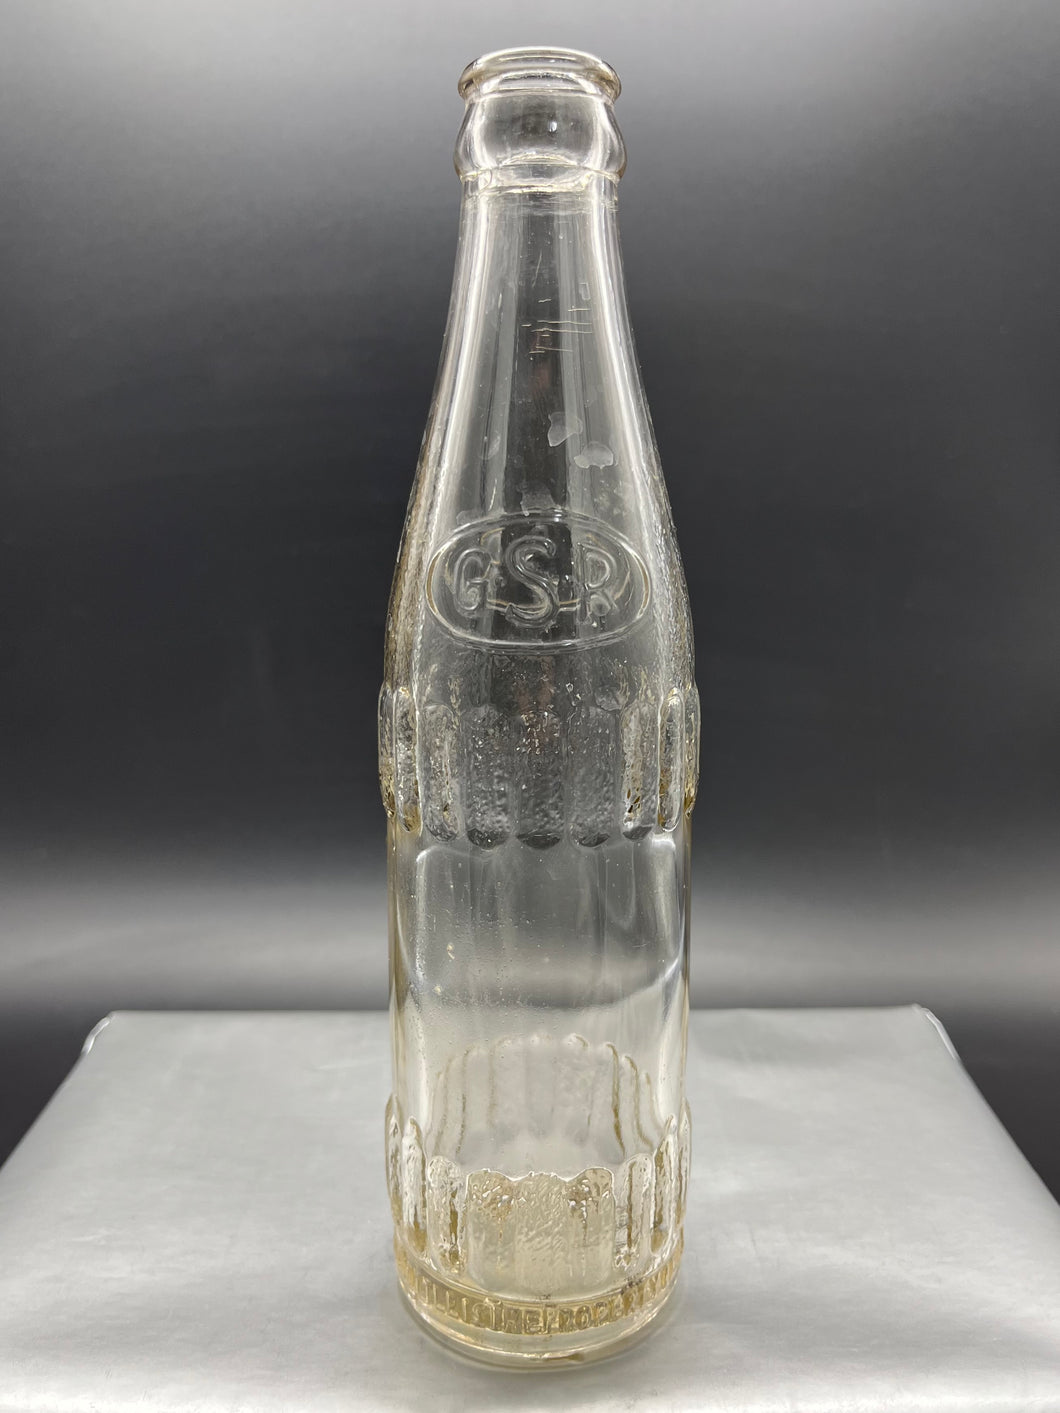 G.S.R Mineral Water Company Clear Glass Bottle